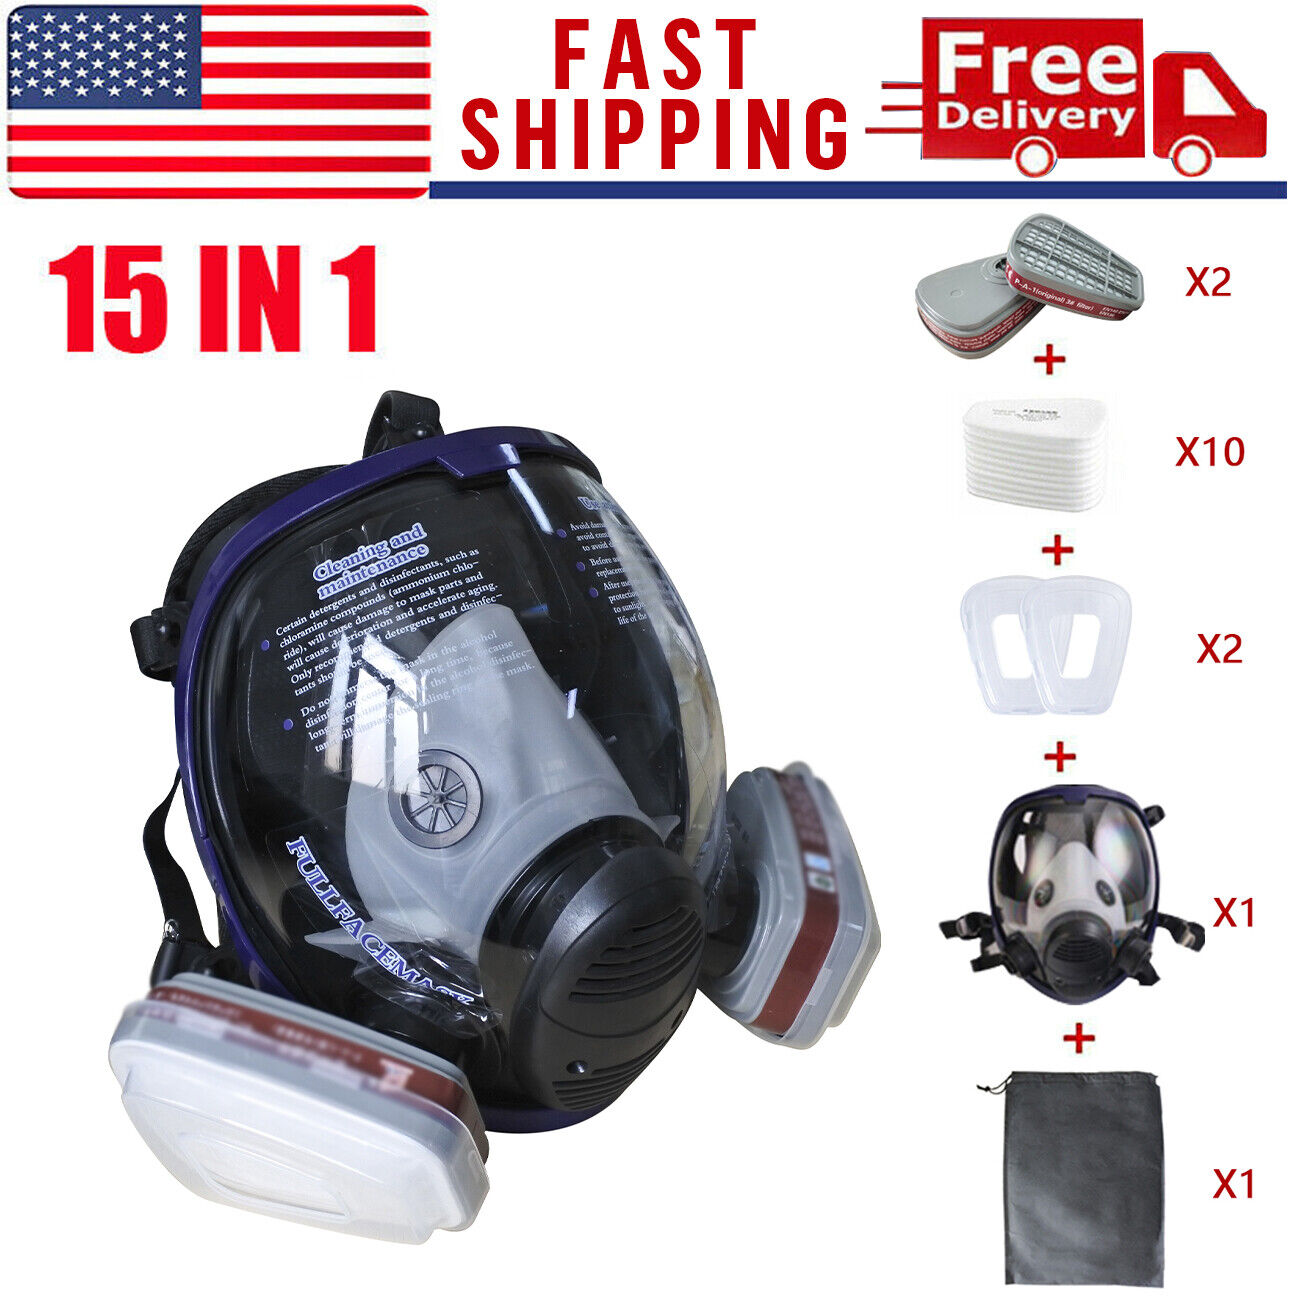 15 IN 1 Gas Mask Full Face Respirator 6800 Facepiece Protect For Spray Painting